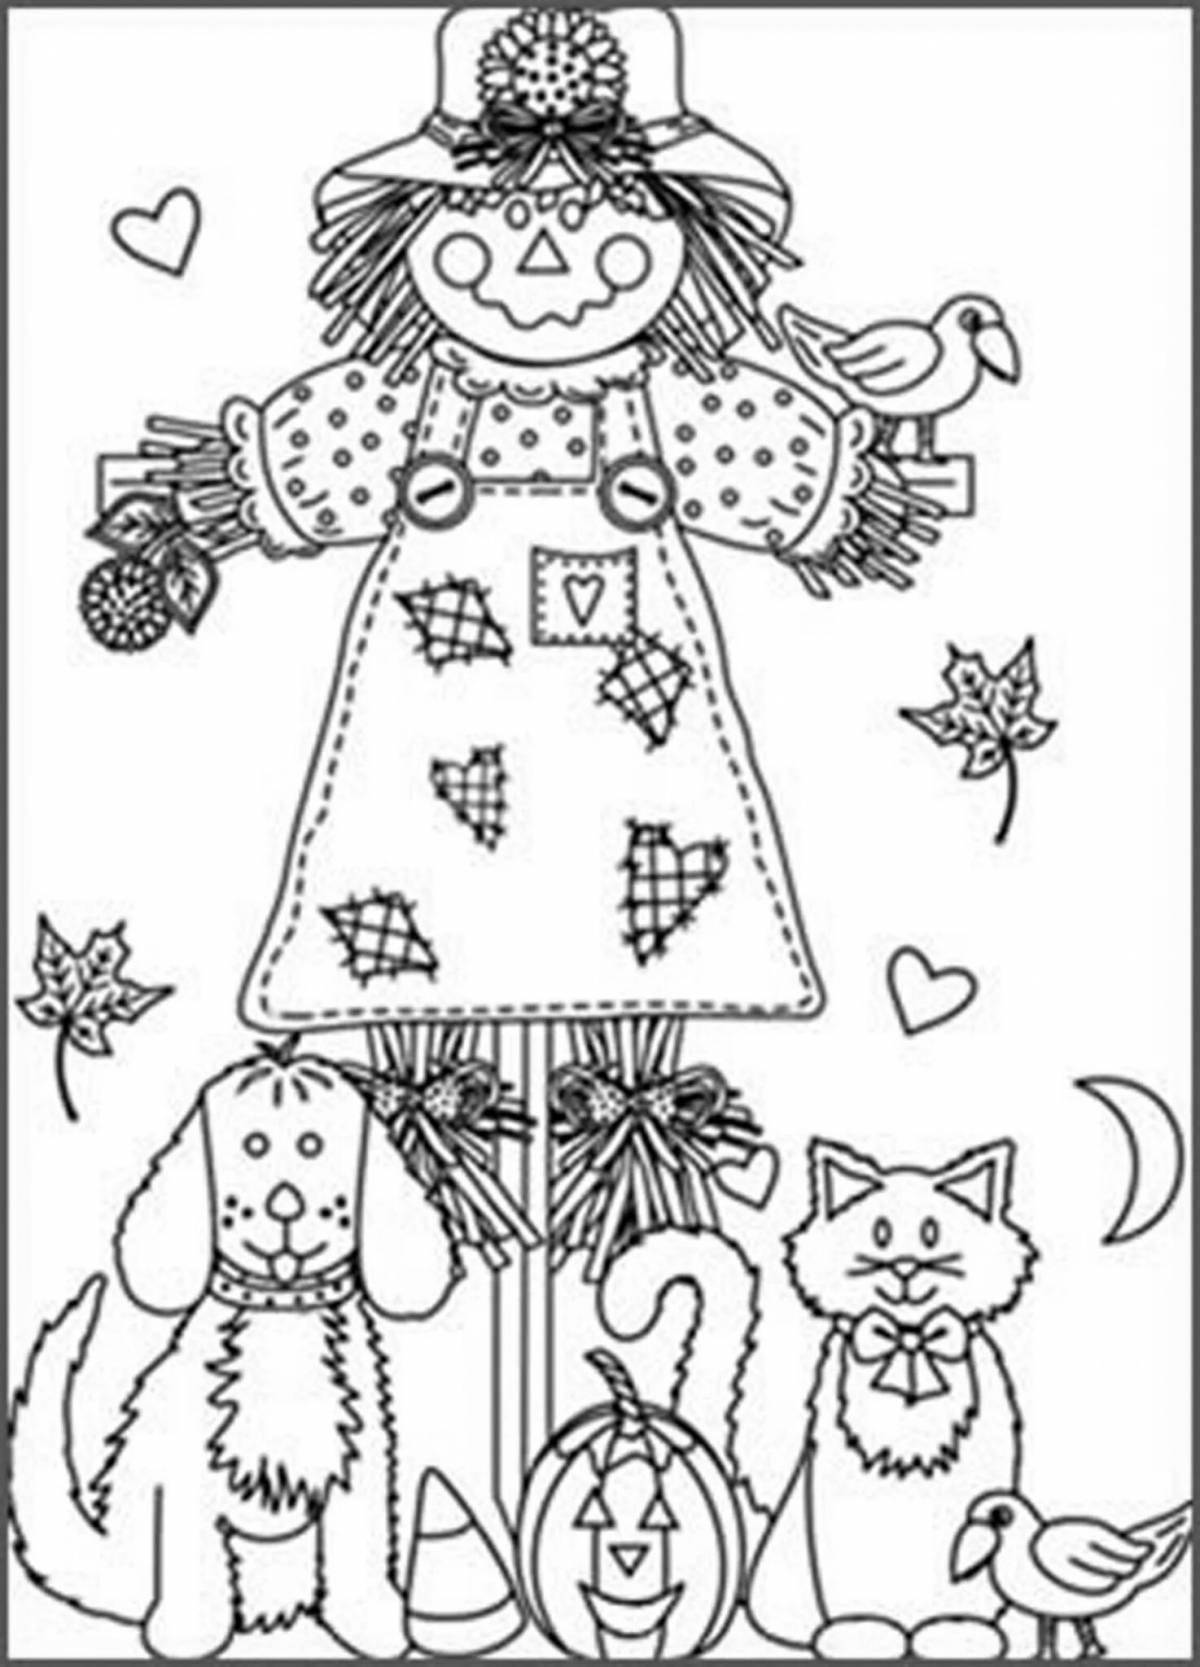 Fancy carnival scarecrow coloring page